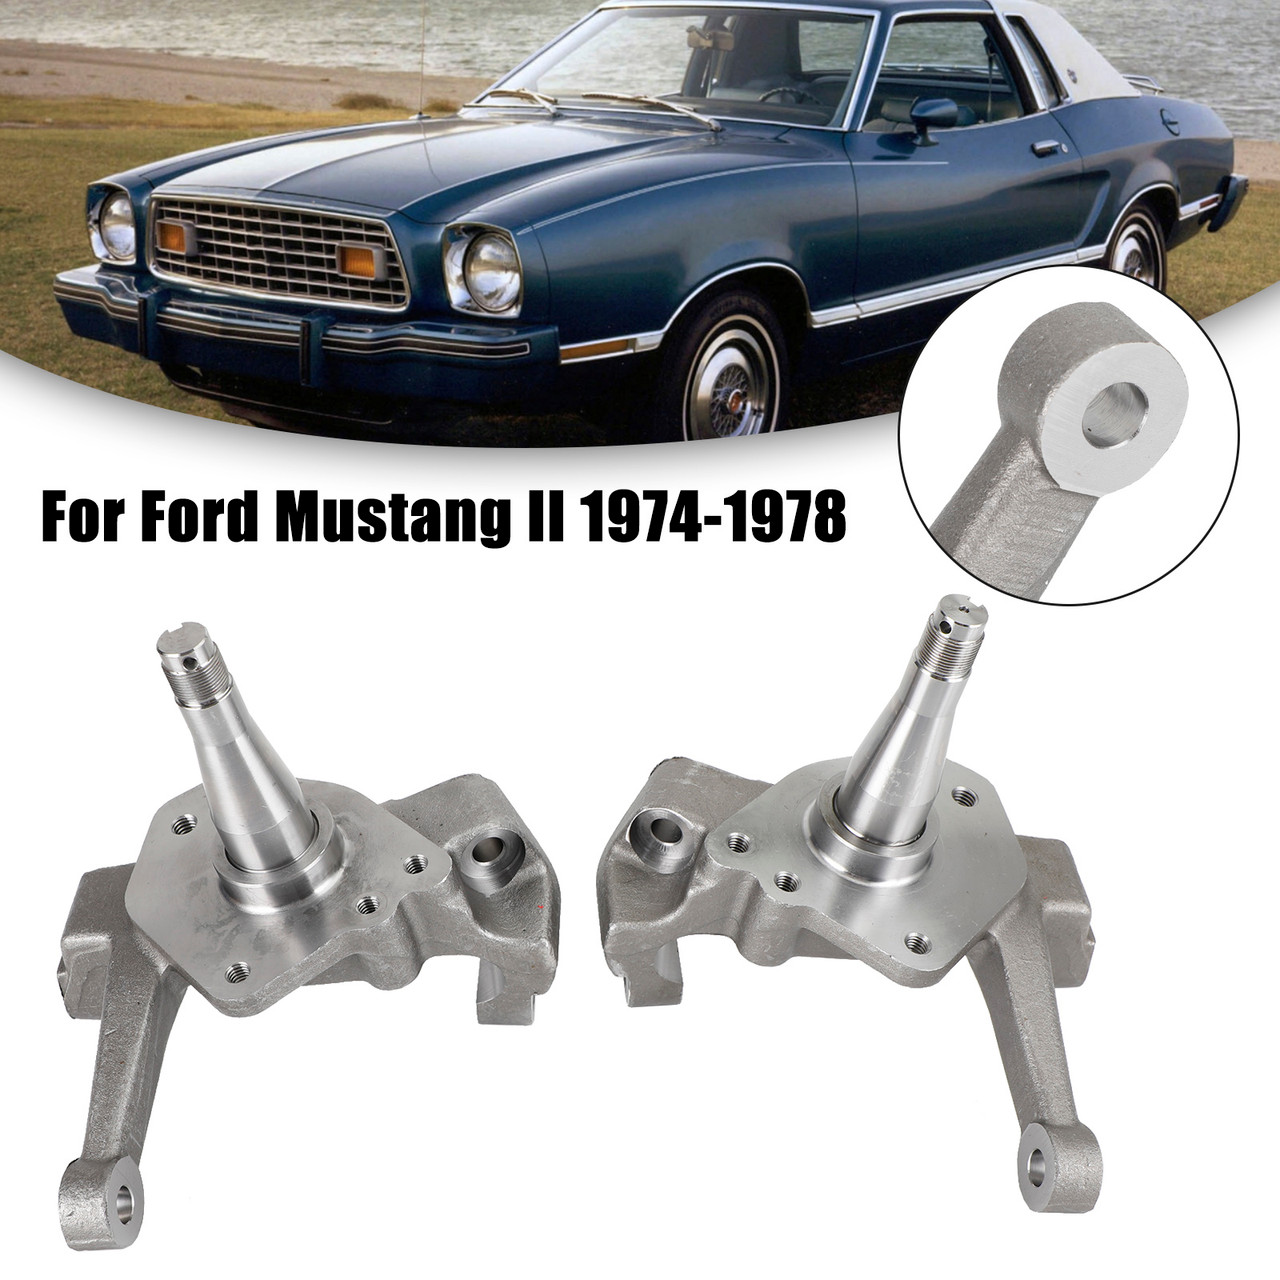 1973-1980 Pinto Type Front End 2" Drop Spindles